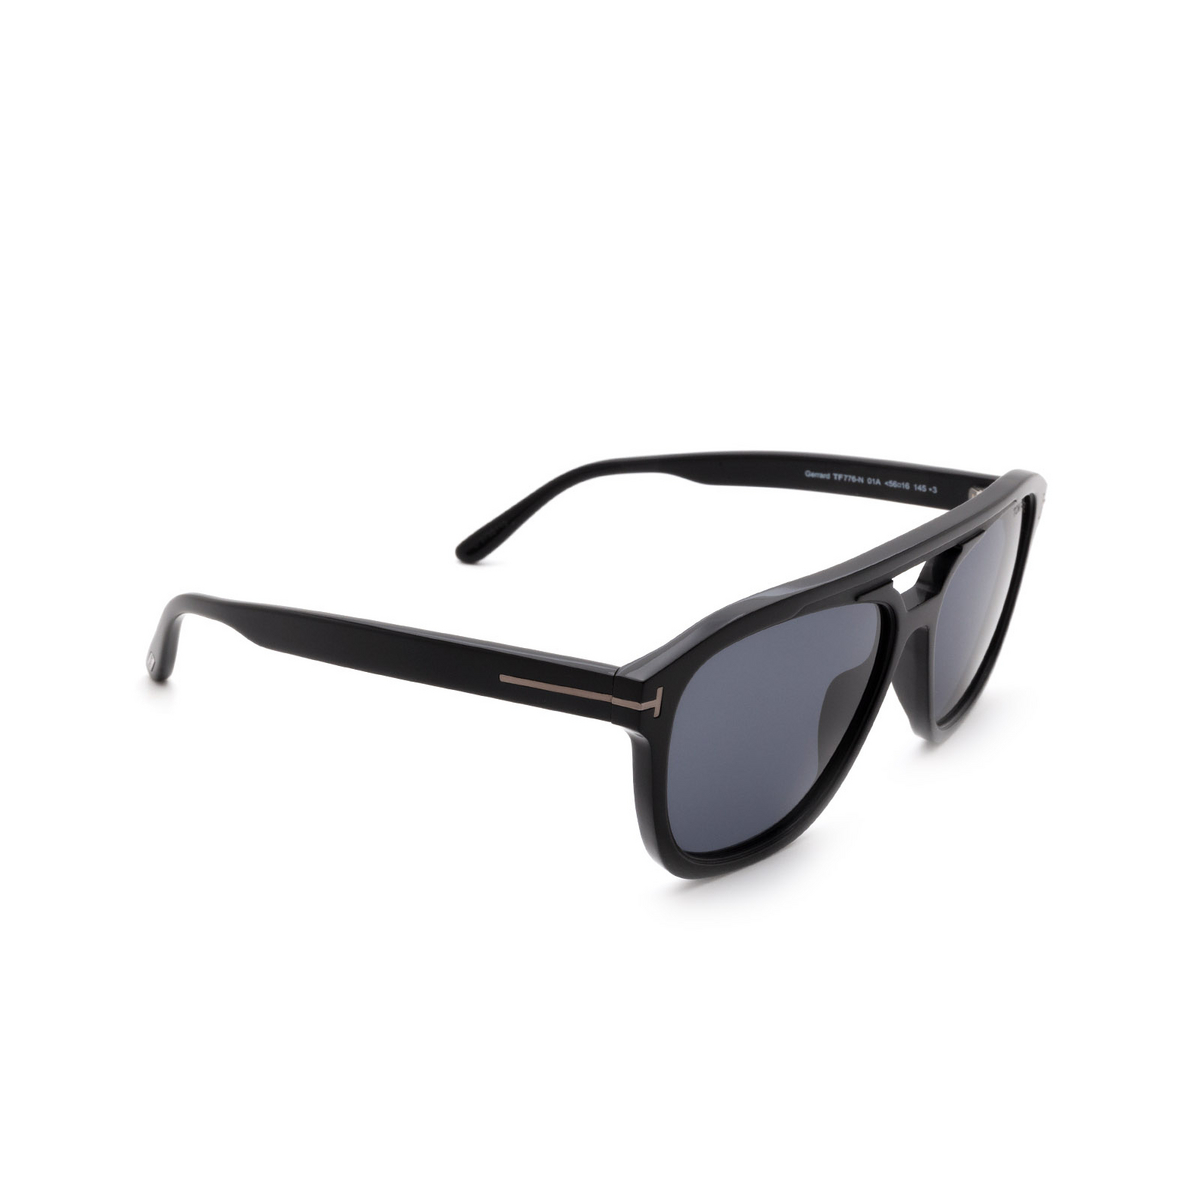 Tom Ford® Sunglasses: Gerrard FT0776-N color Shiny Black 01A - front view.